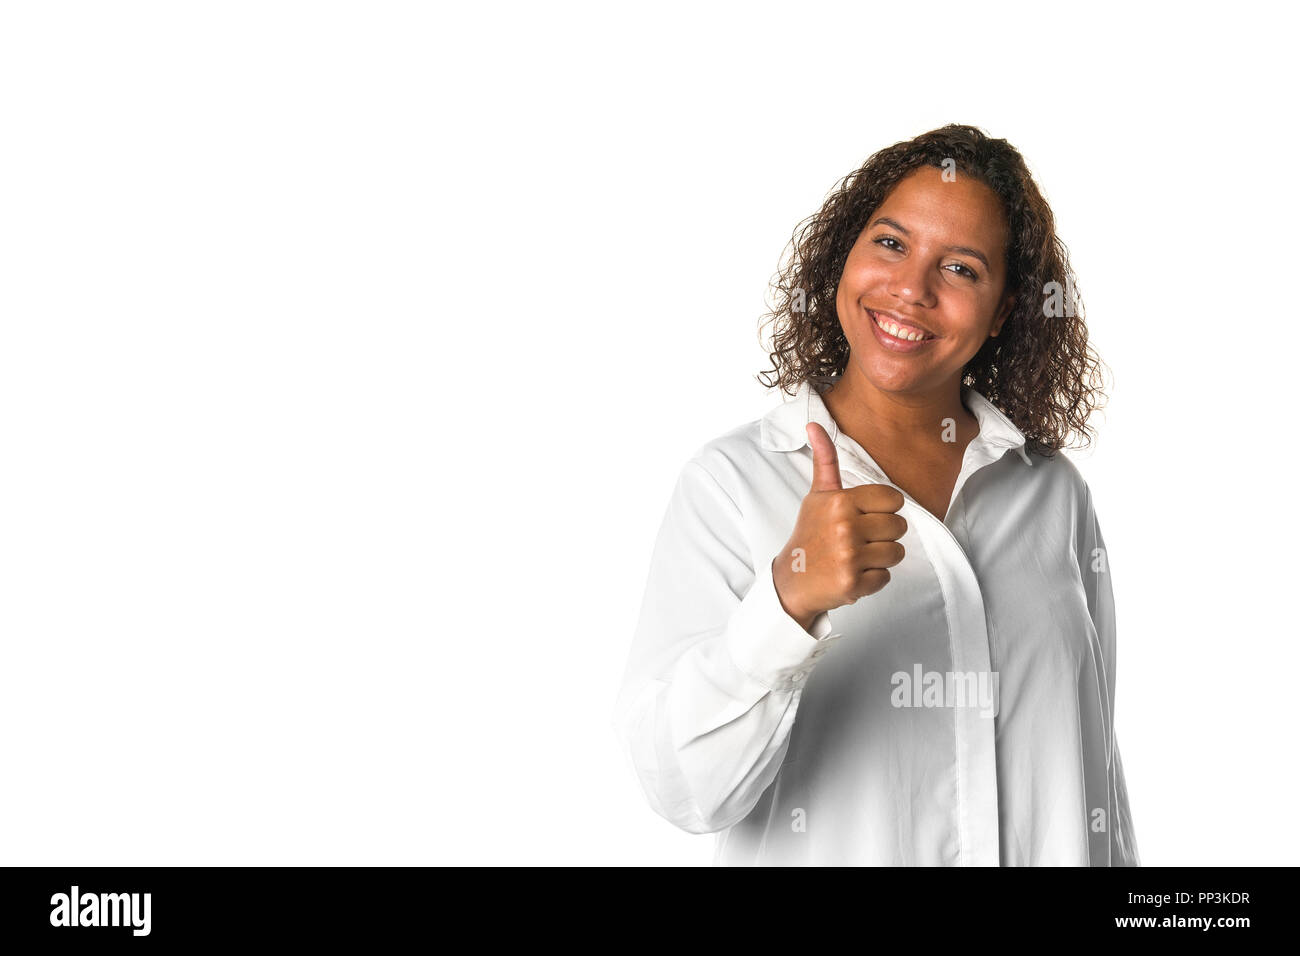 Young pretty black woman showing thumbs up sign isolated on a white background Stock Photo